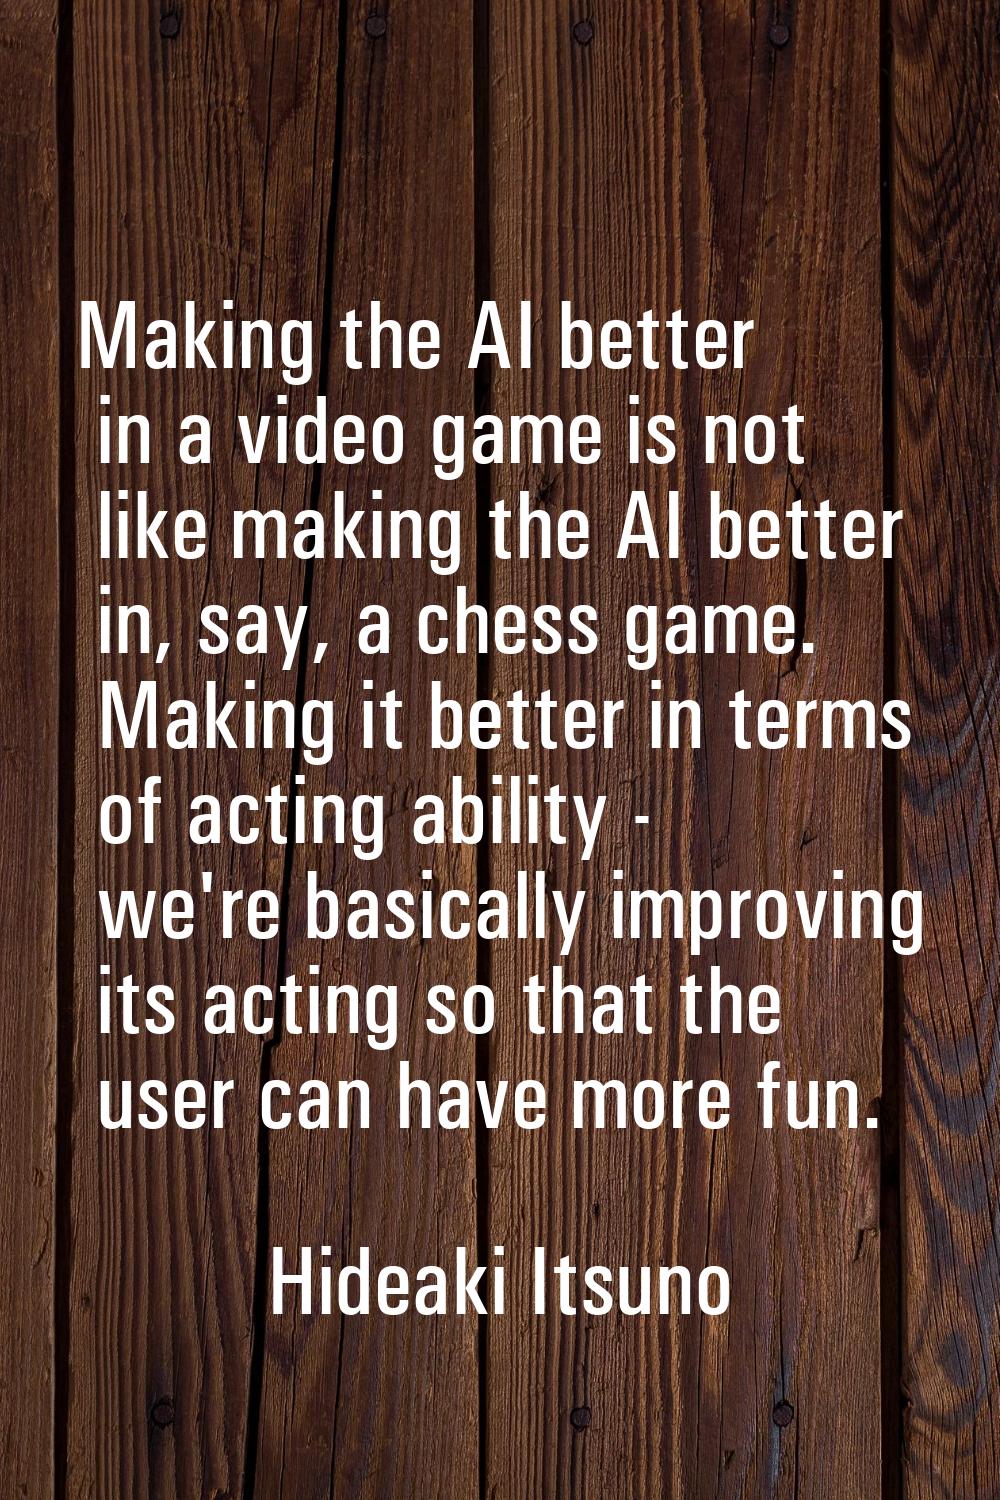 Making the AI better in a video game is not like making the AI better in, say, a chess game. Making